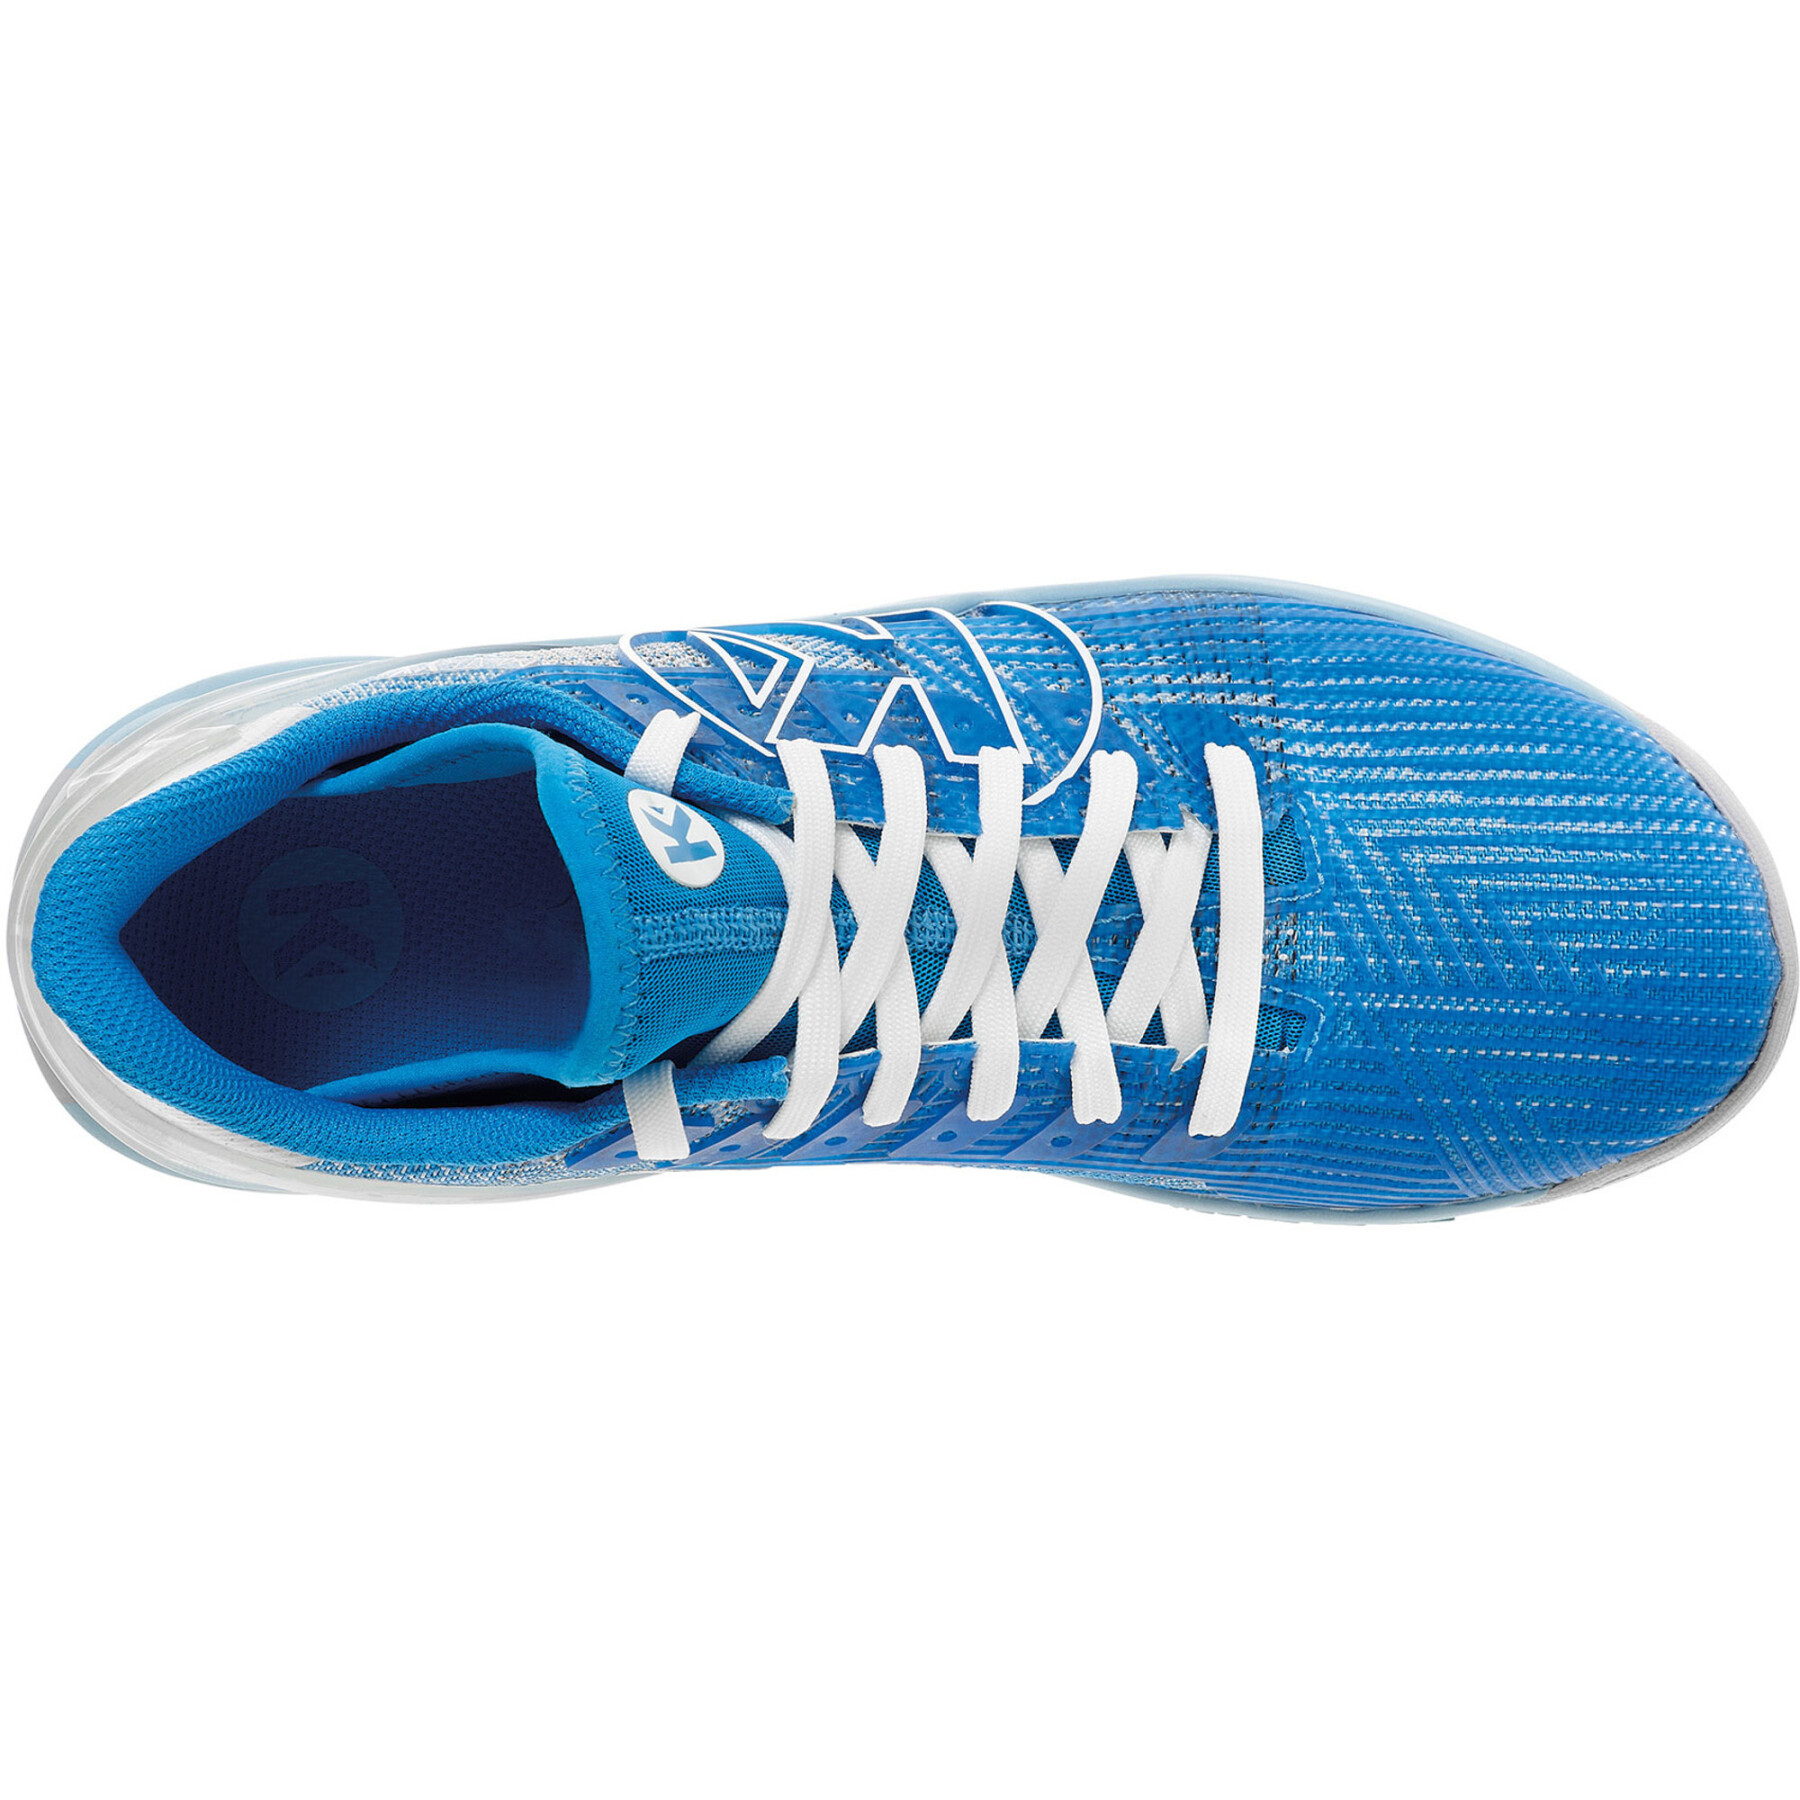 Women's shoes Kempa Attack One 2.0